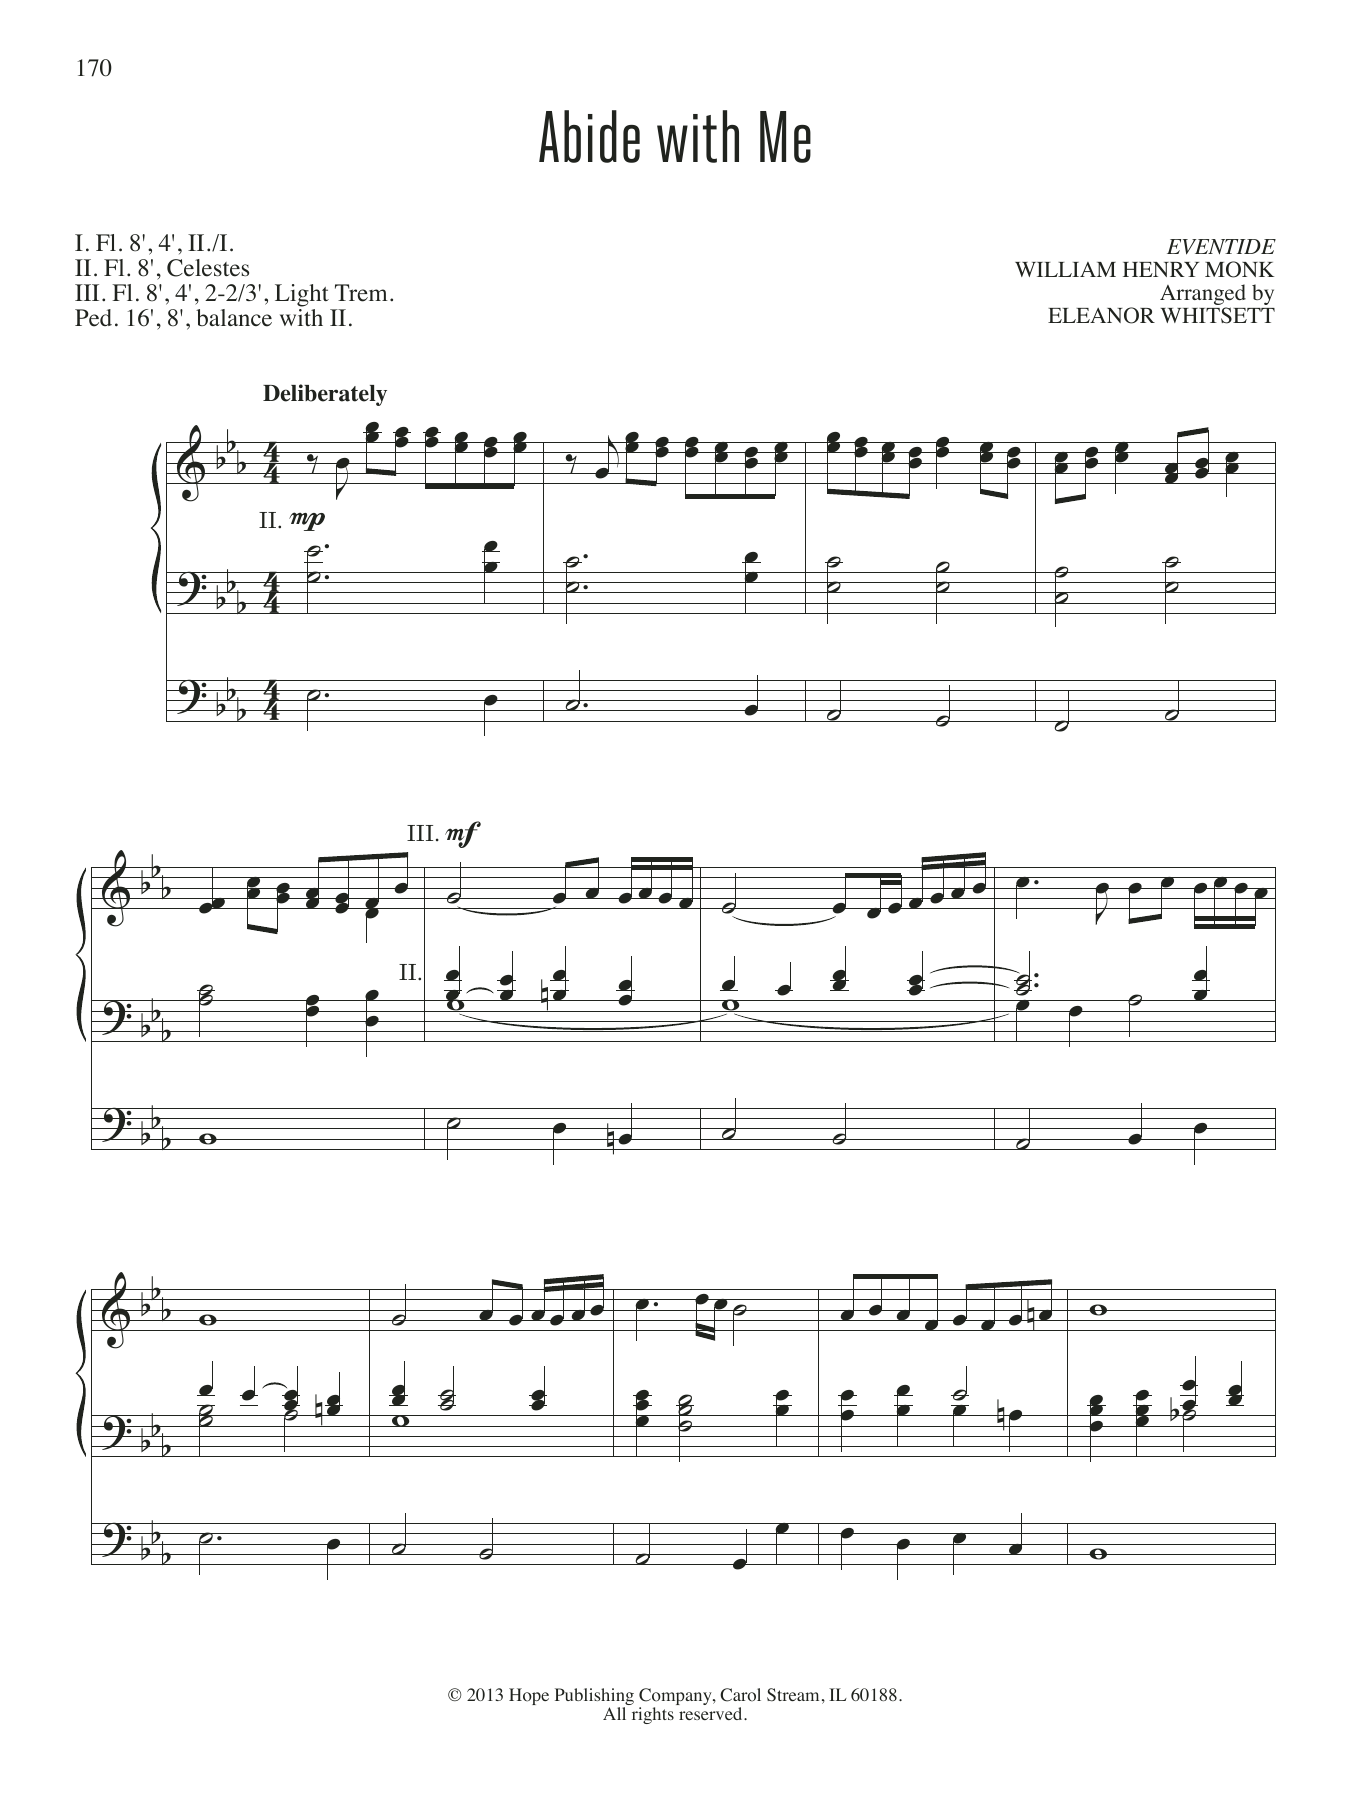 Download Eleanor Whitsett Abide with Me Sheet Music